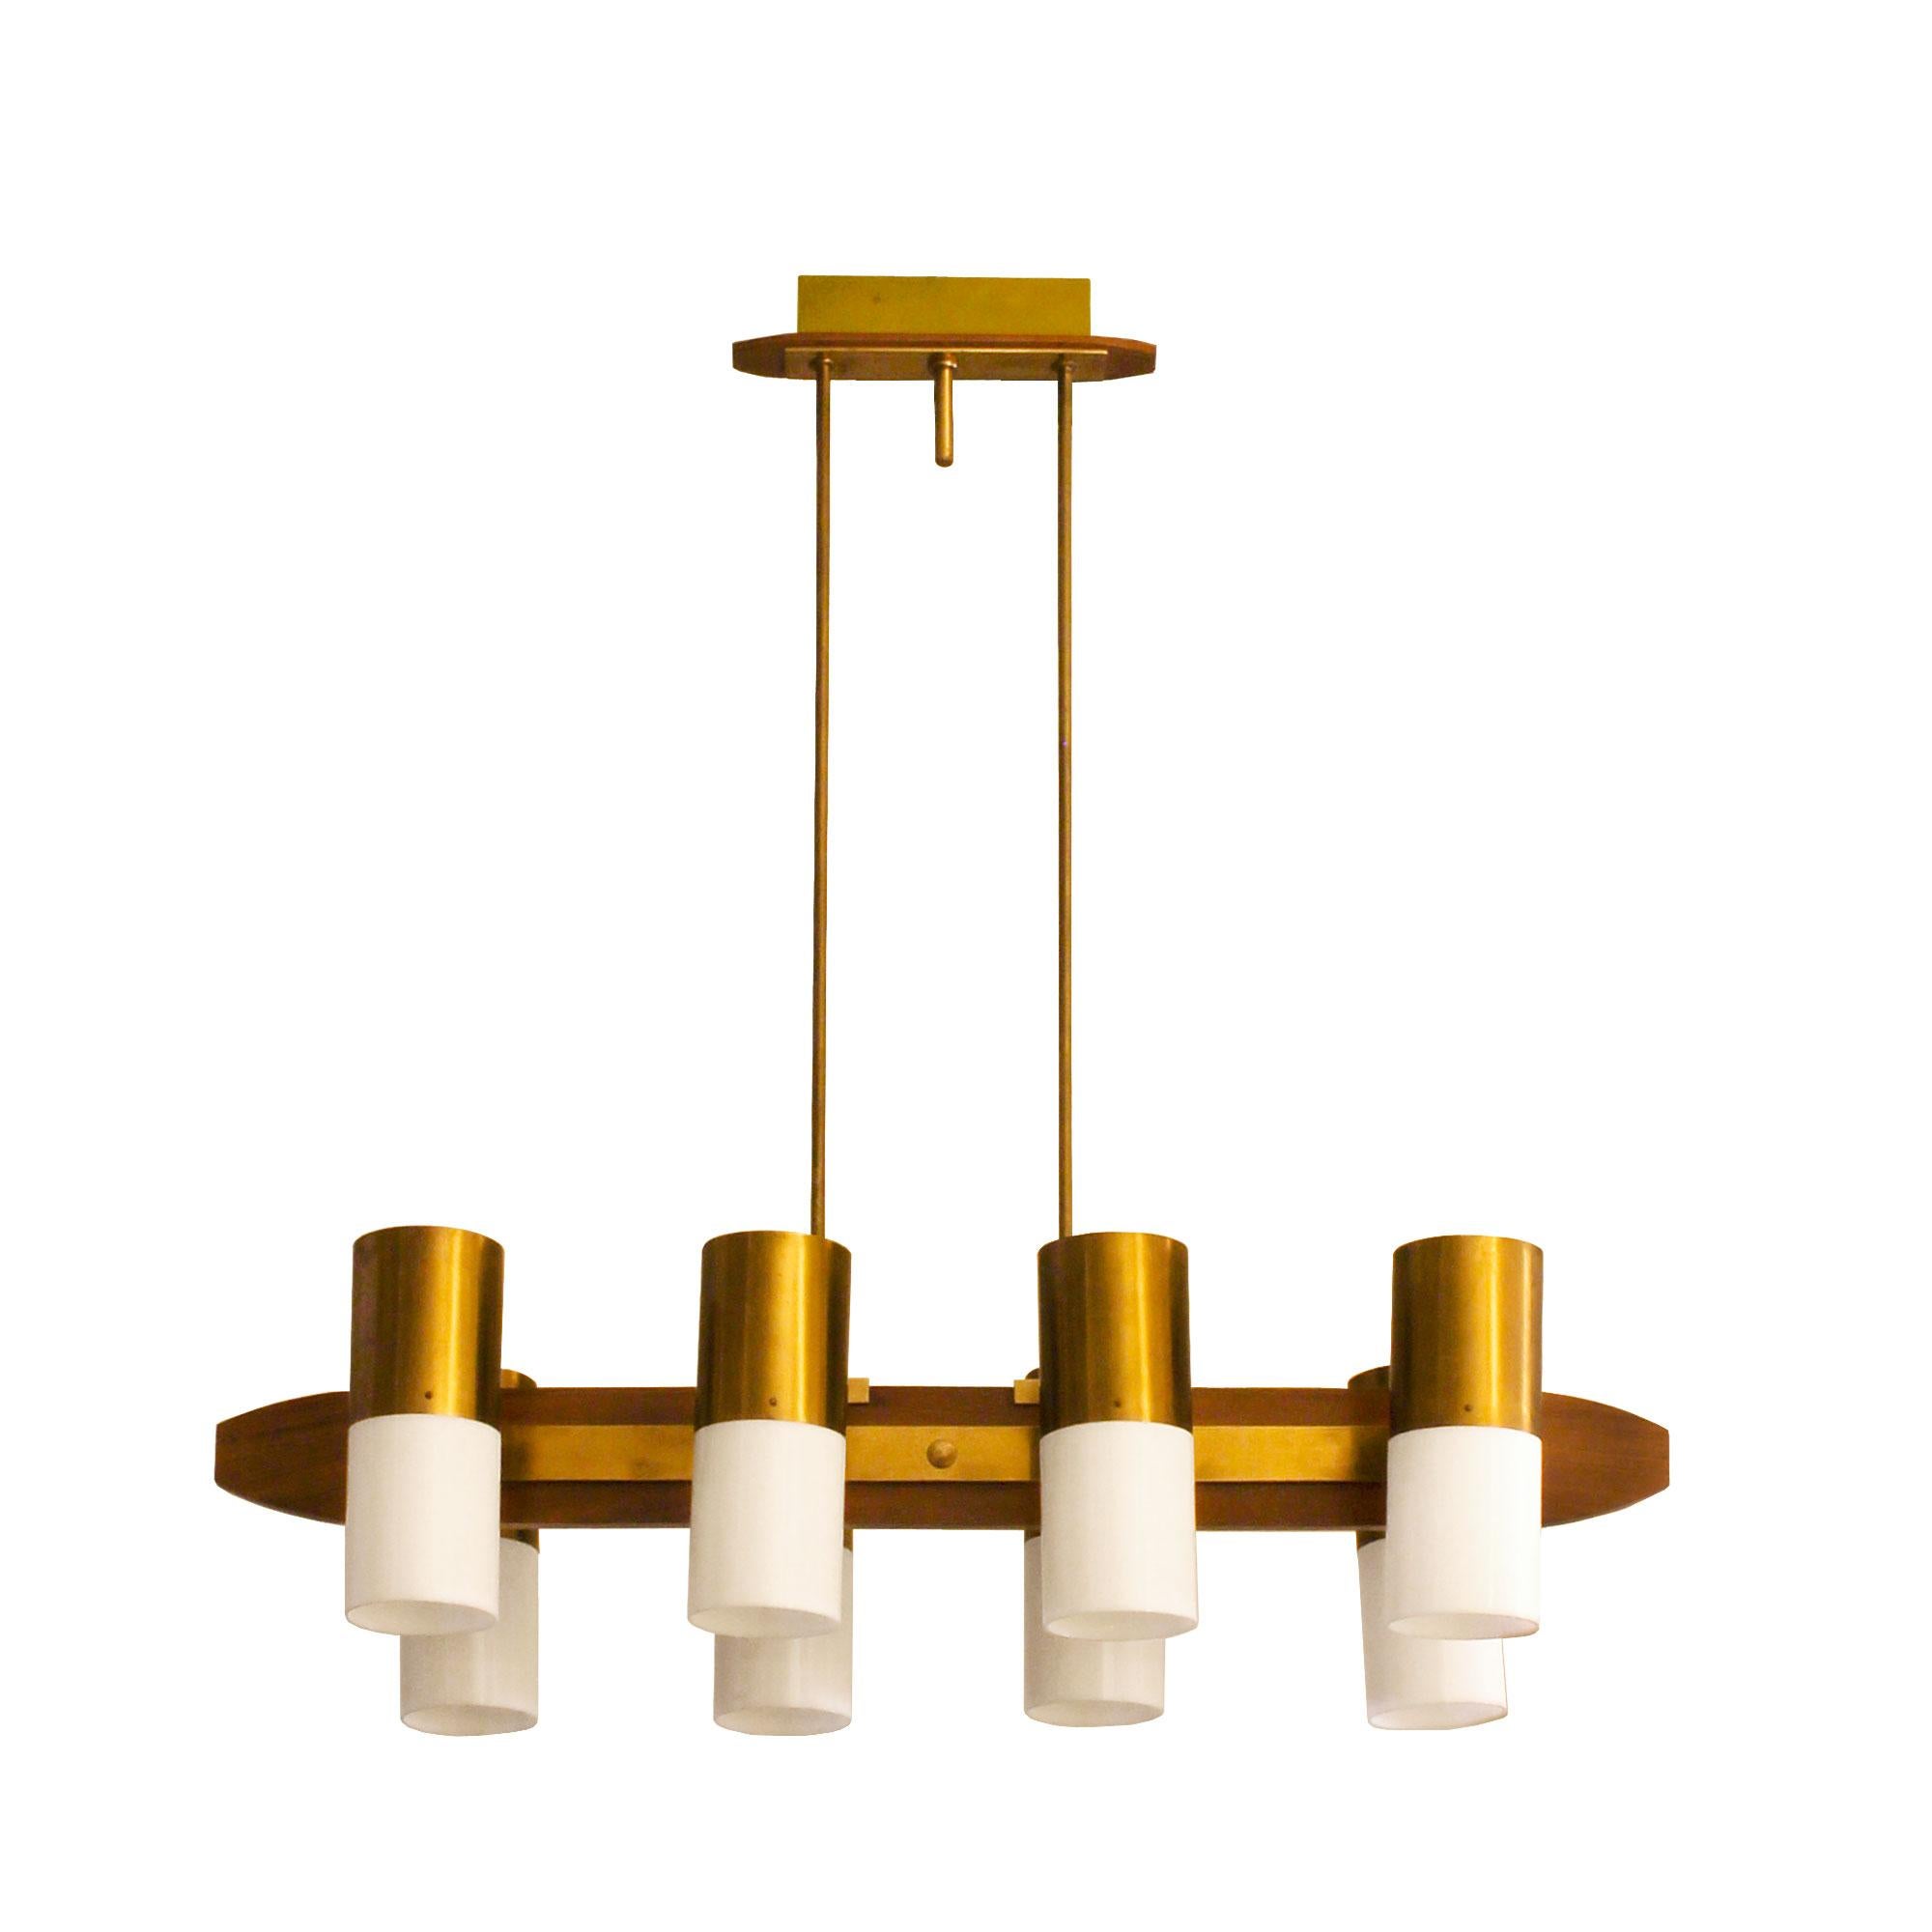 Chandelier with eight lights, solid teak, polished brass and plexiglass lampshades,

Italy, circa 1960.

Lampshades height: 25 cm.